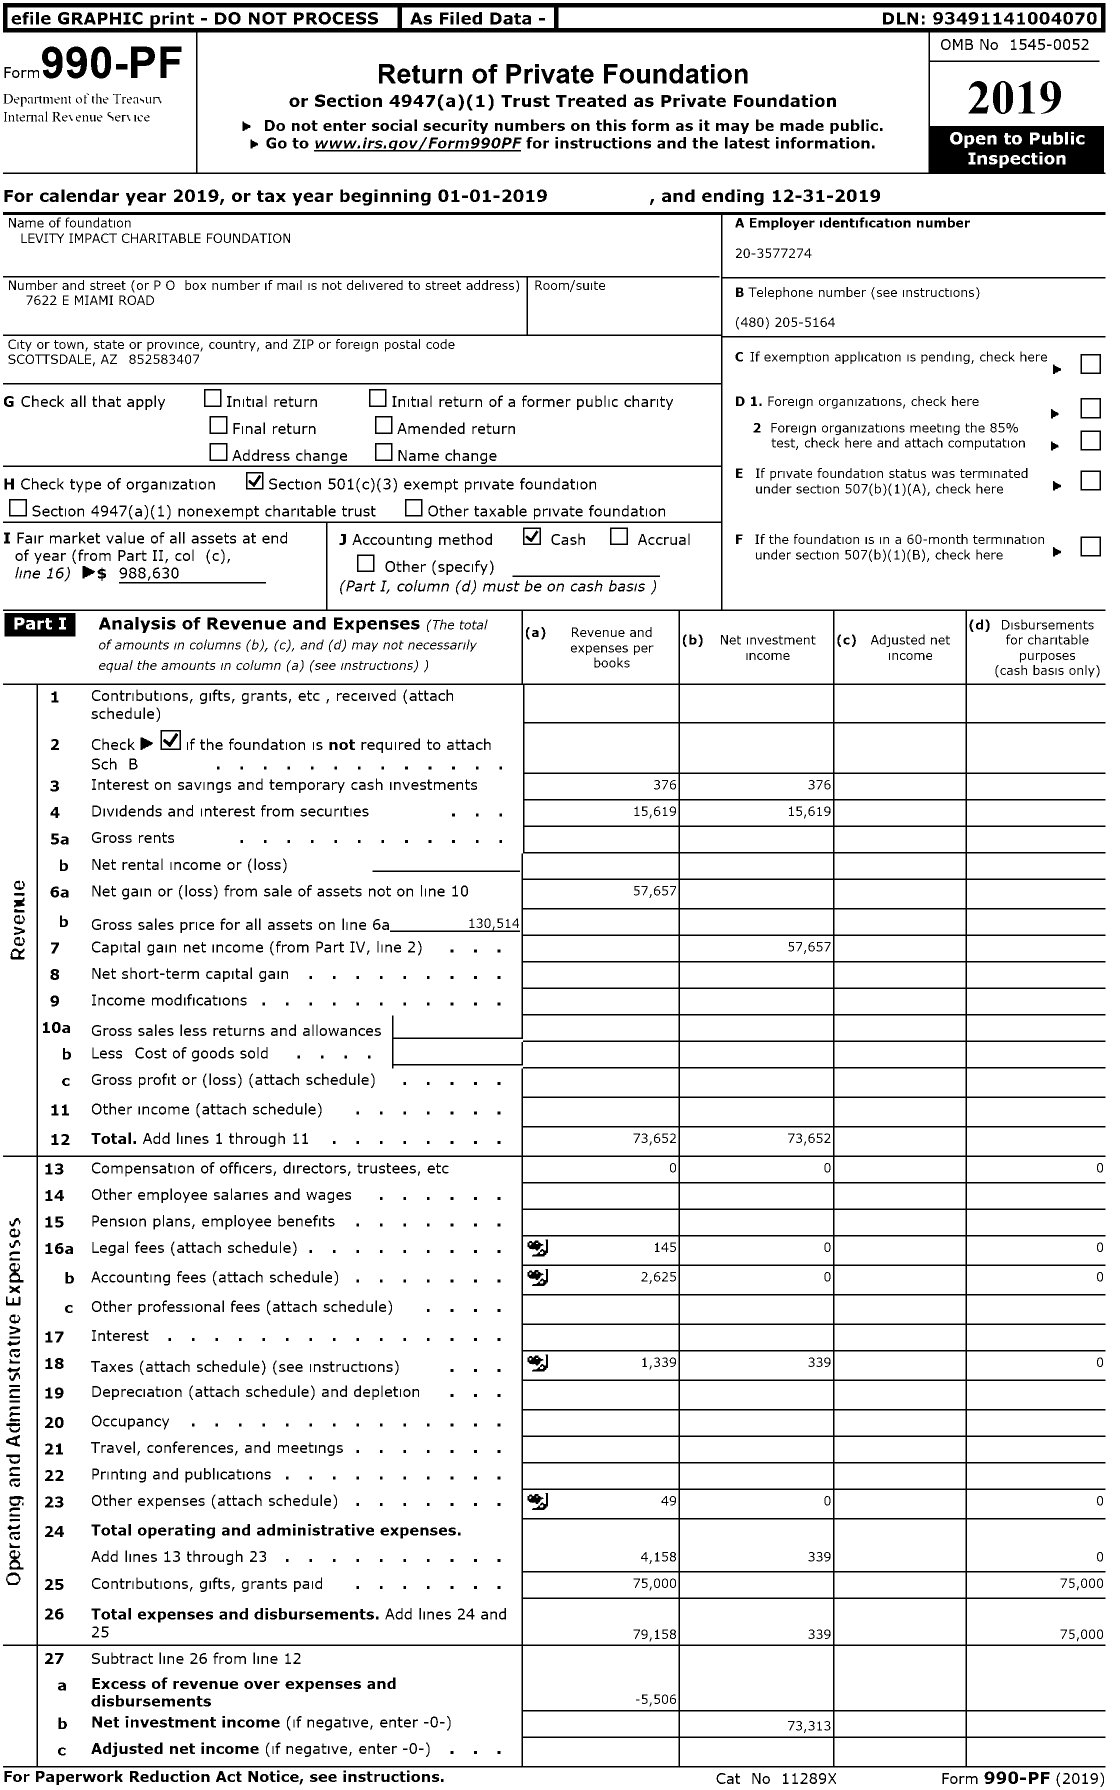 Image of first page of 2019 Form 990PR for Levity Impact Charitable Foundation